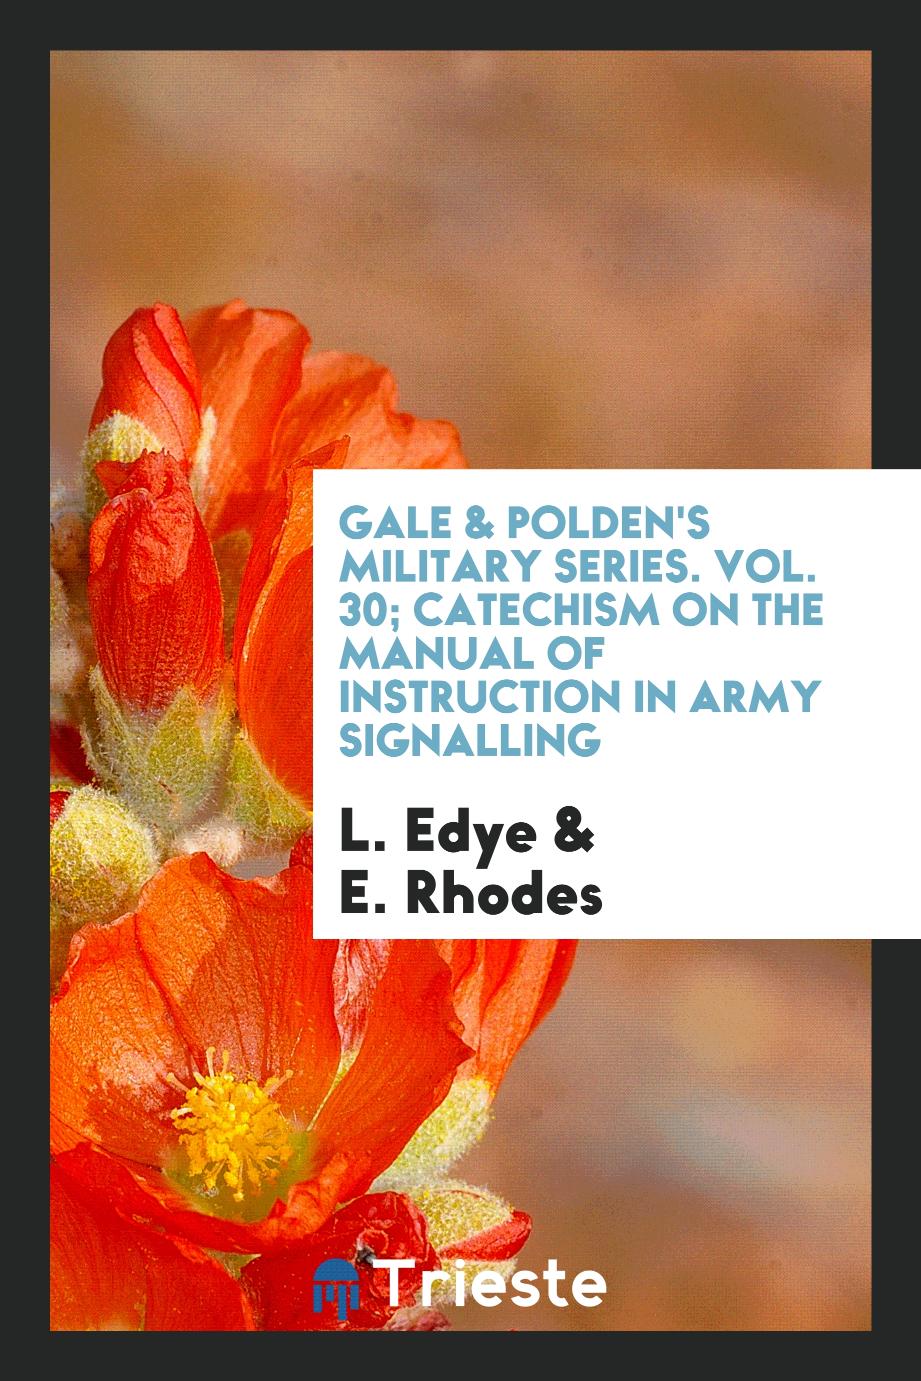 Gale & Polden's Military Series. Vol. 30; Catechism on the manual of instruction in Army signalling